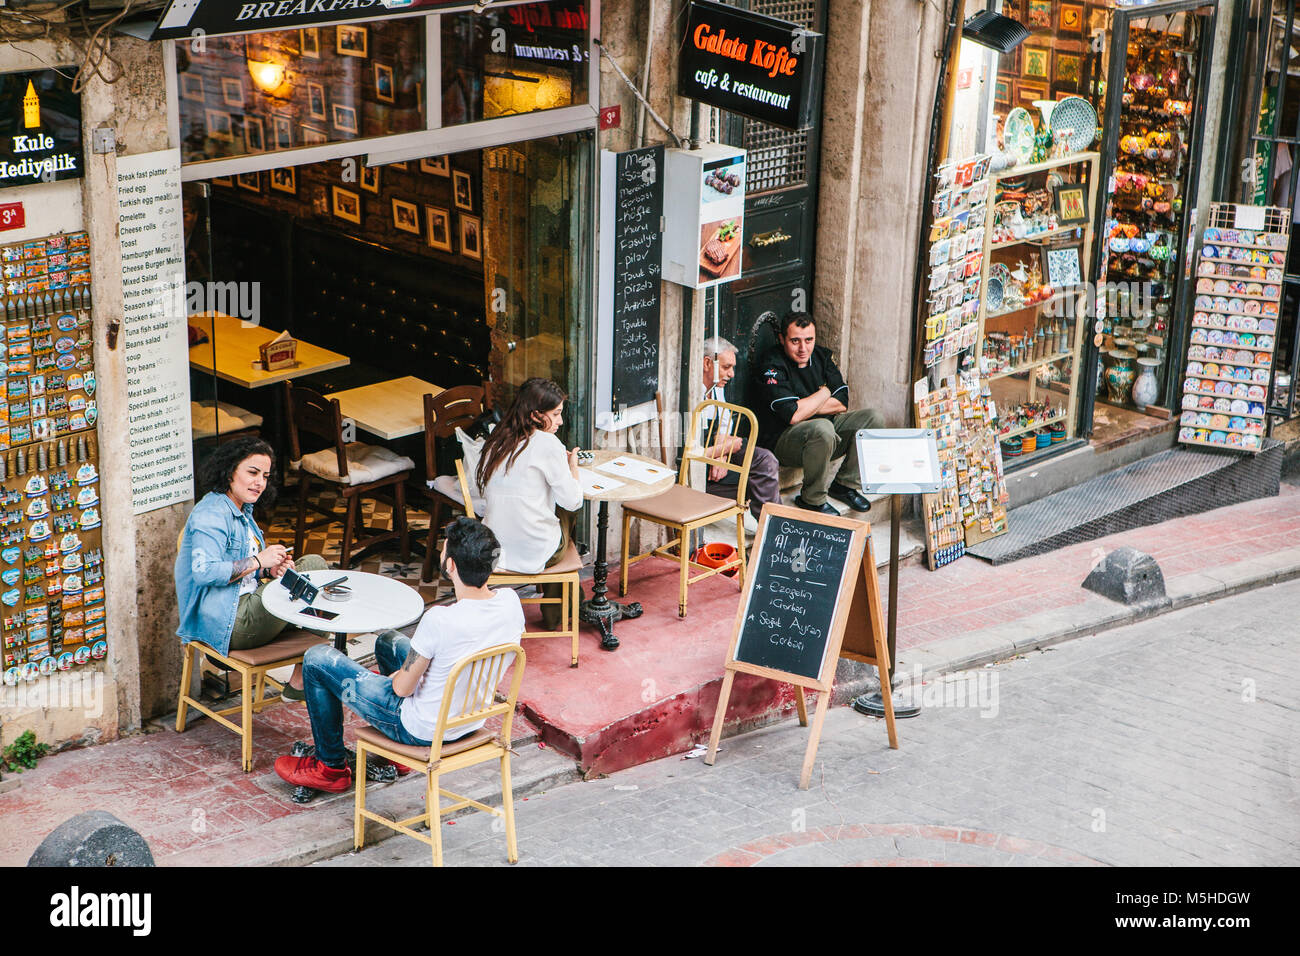 Istanbul, June 15, 2017: People sitting outside Galata Kofte restaurant in Istanbul, Turkey. A popular place among tourists and local people. Stock Photo